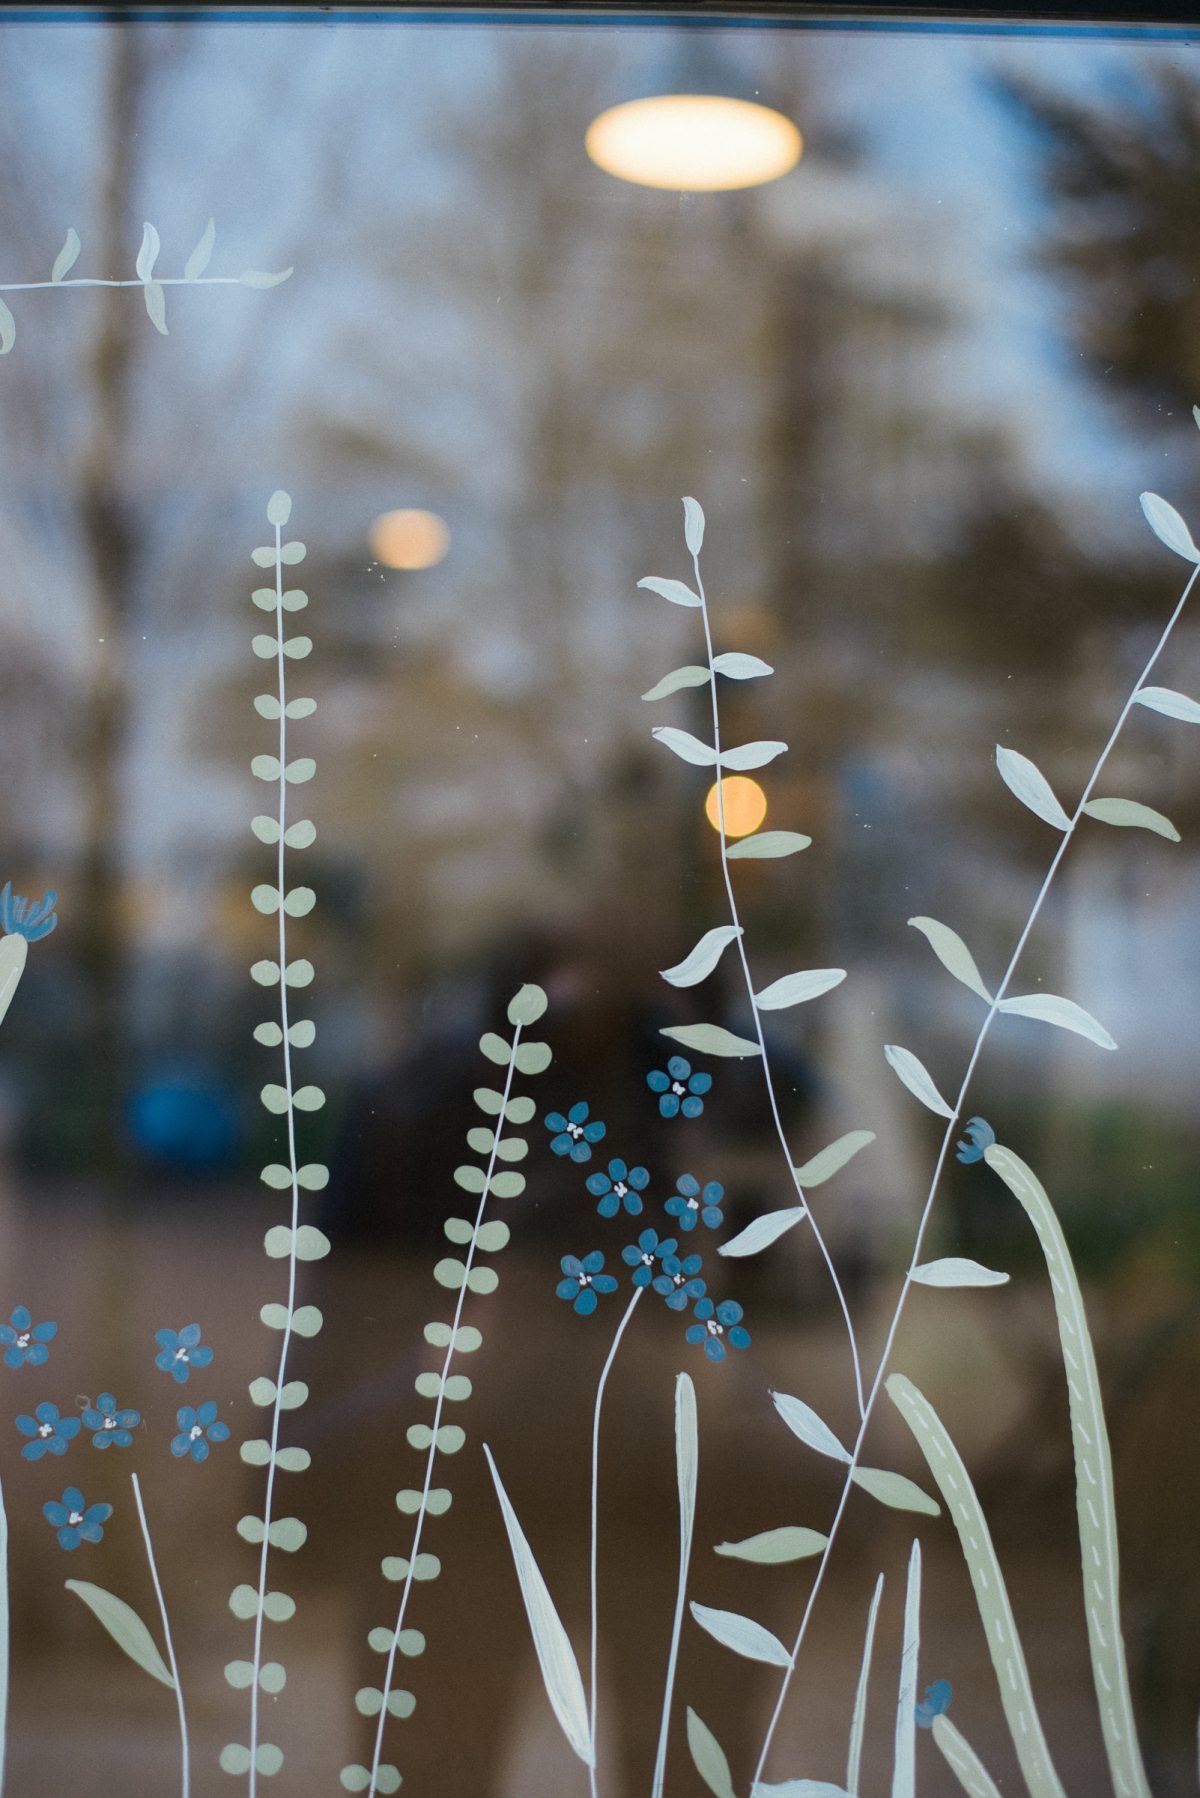 A section of the finished window. We kept it simple and natural, with trailing leaves and small blue flowers to match the blue painted building.